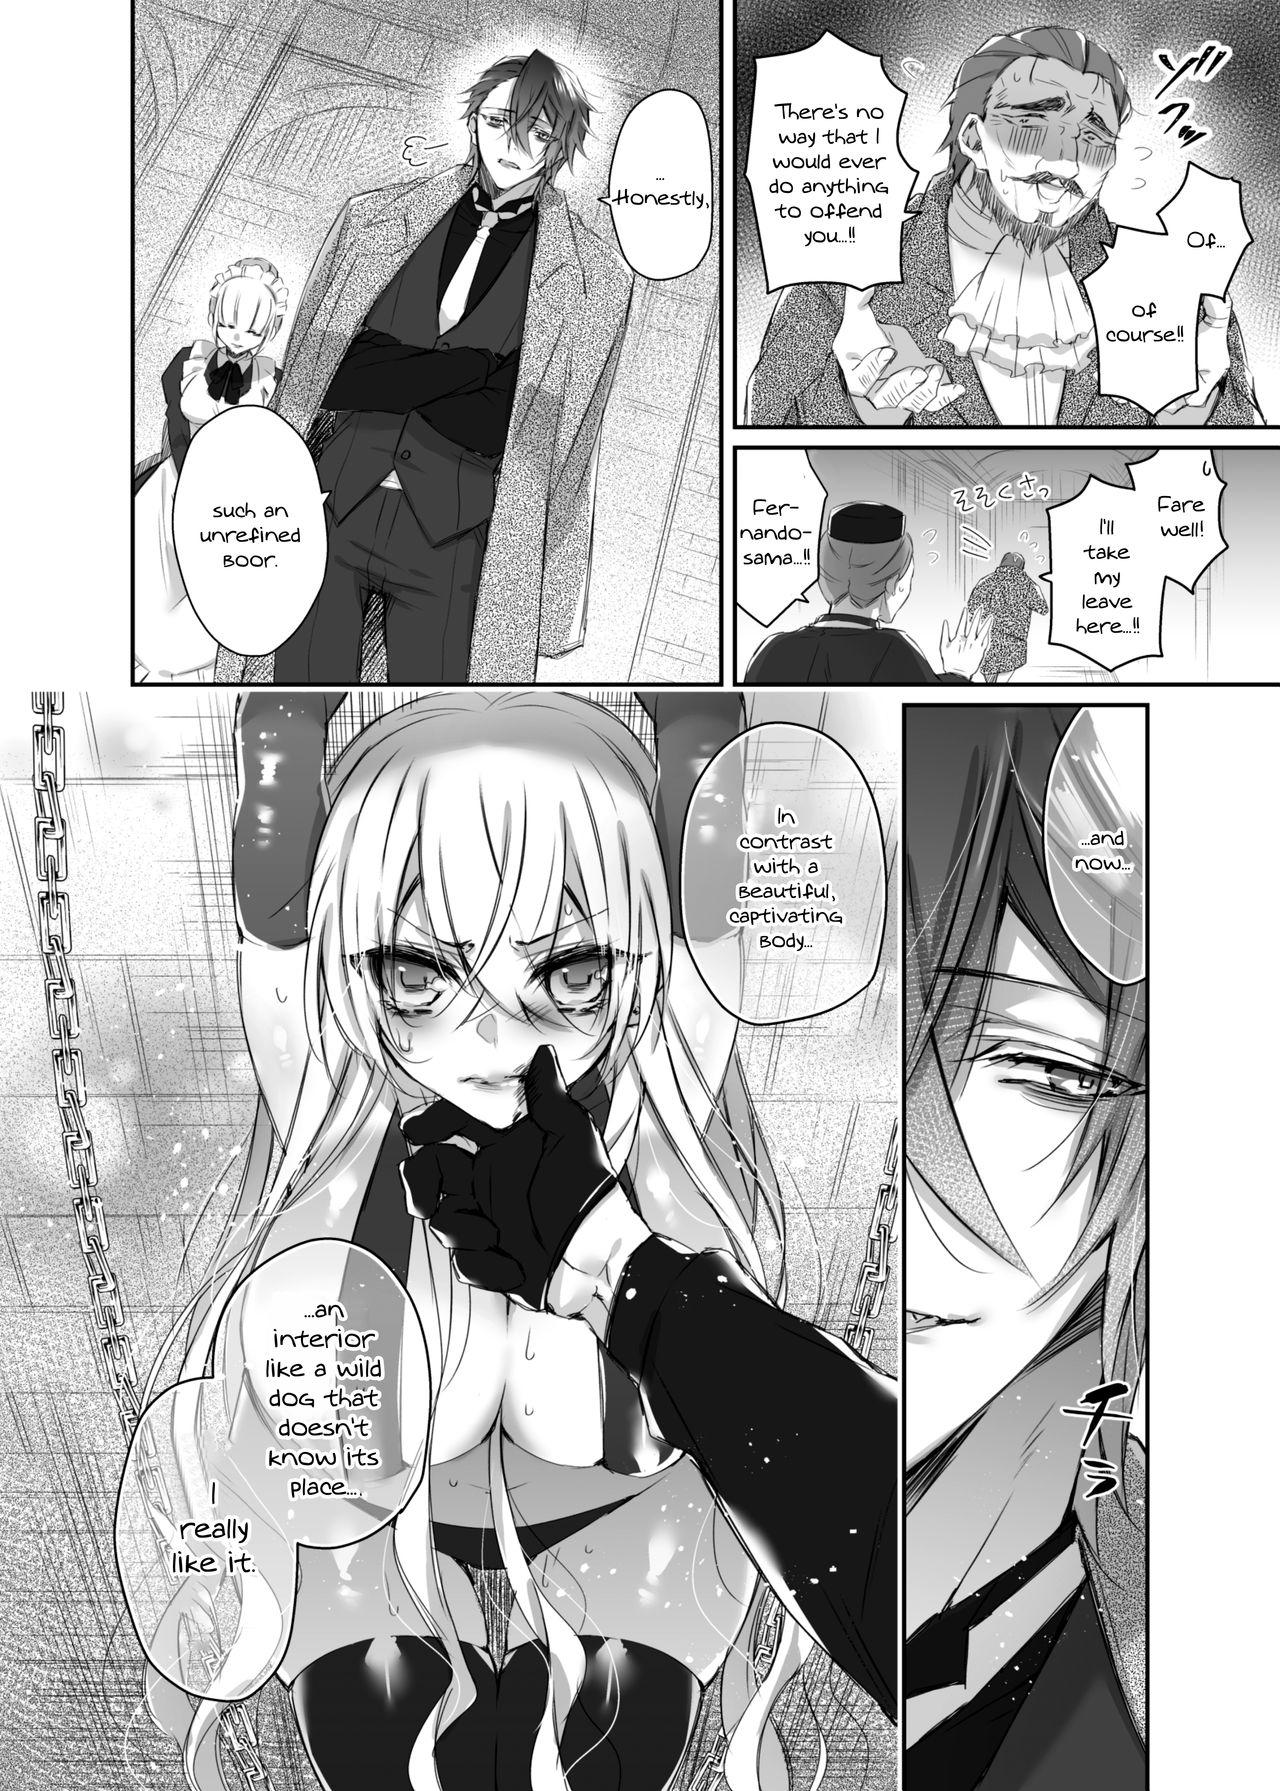 Young Old Maria xx Maid - Original Blowjobs - Page 8